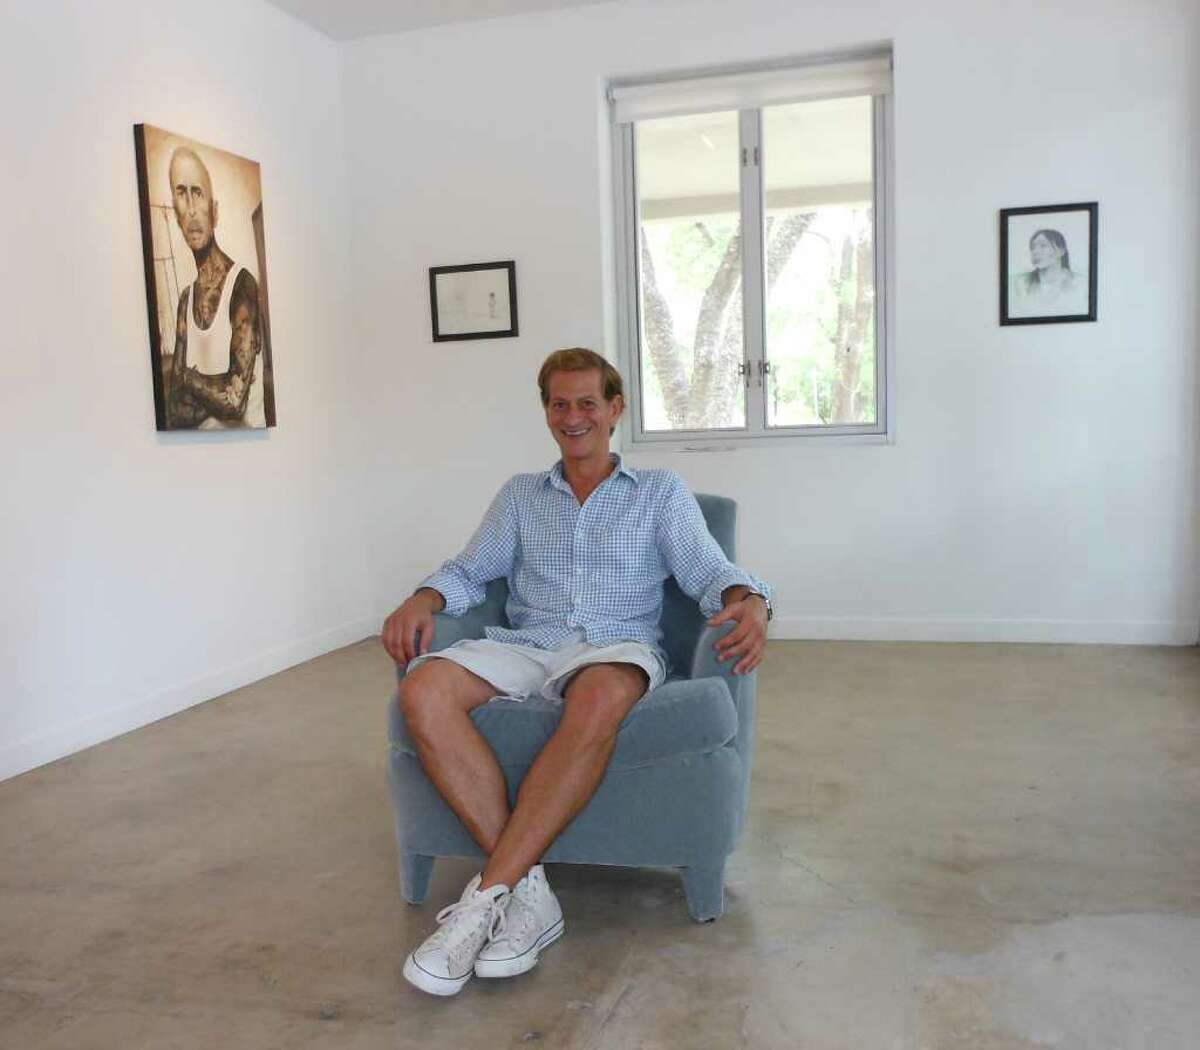 David Shelton has moved David Shelton Gallery from Stone Oak to St. Benedict's in King William.